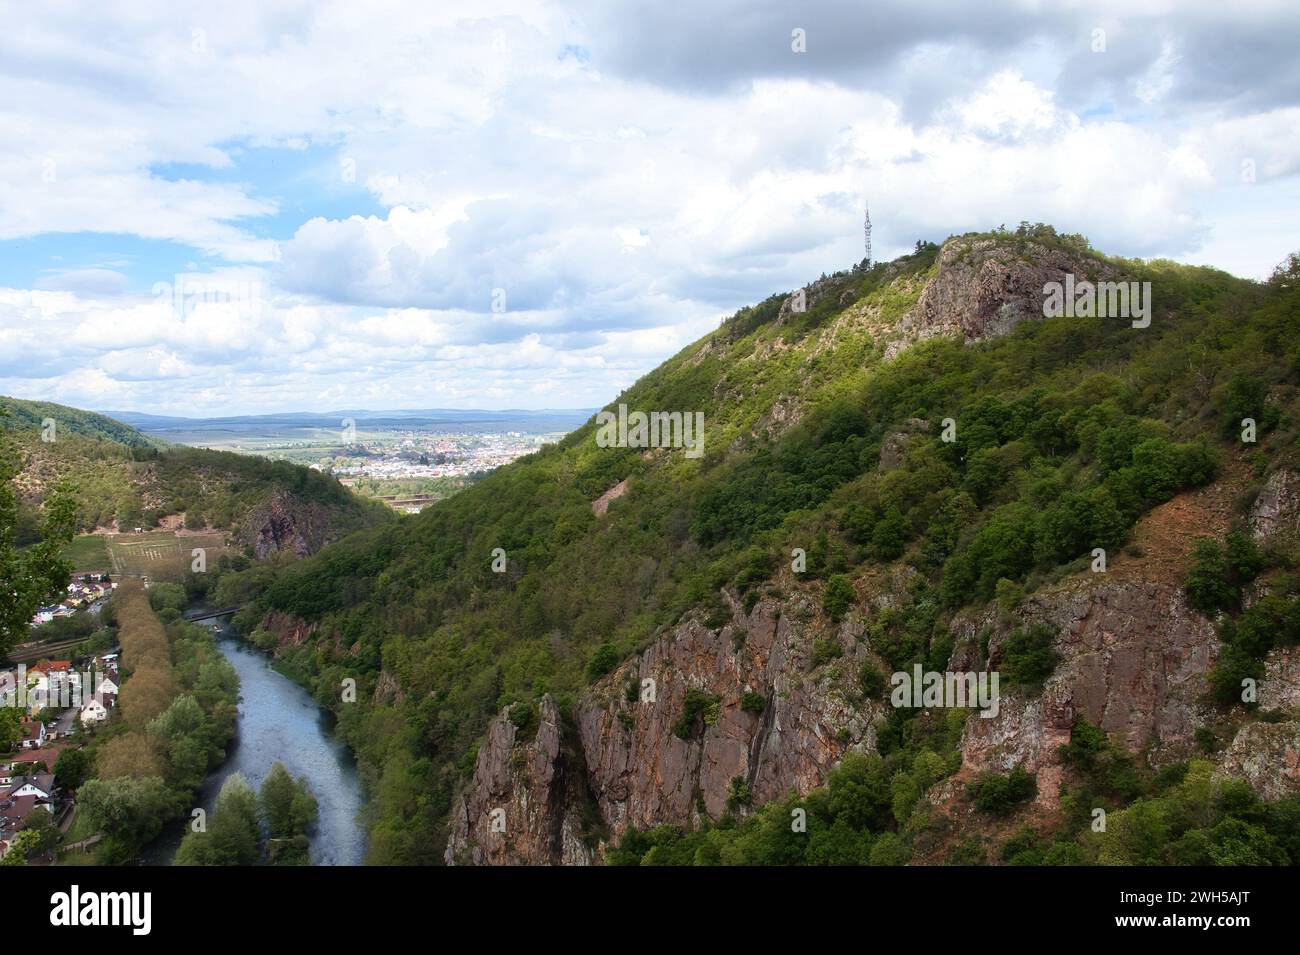 Bad Munster, Germany - May 12, 2021: Sun shining on the top of a cliff in Rotenfels above the Nahe River on a cloudy spring day in Rhineland Palatinat Stock Photo